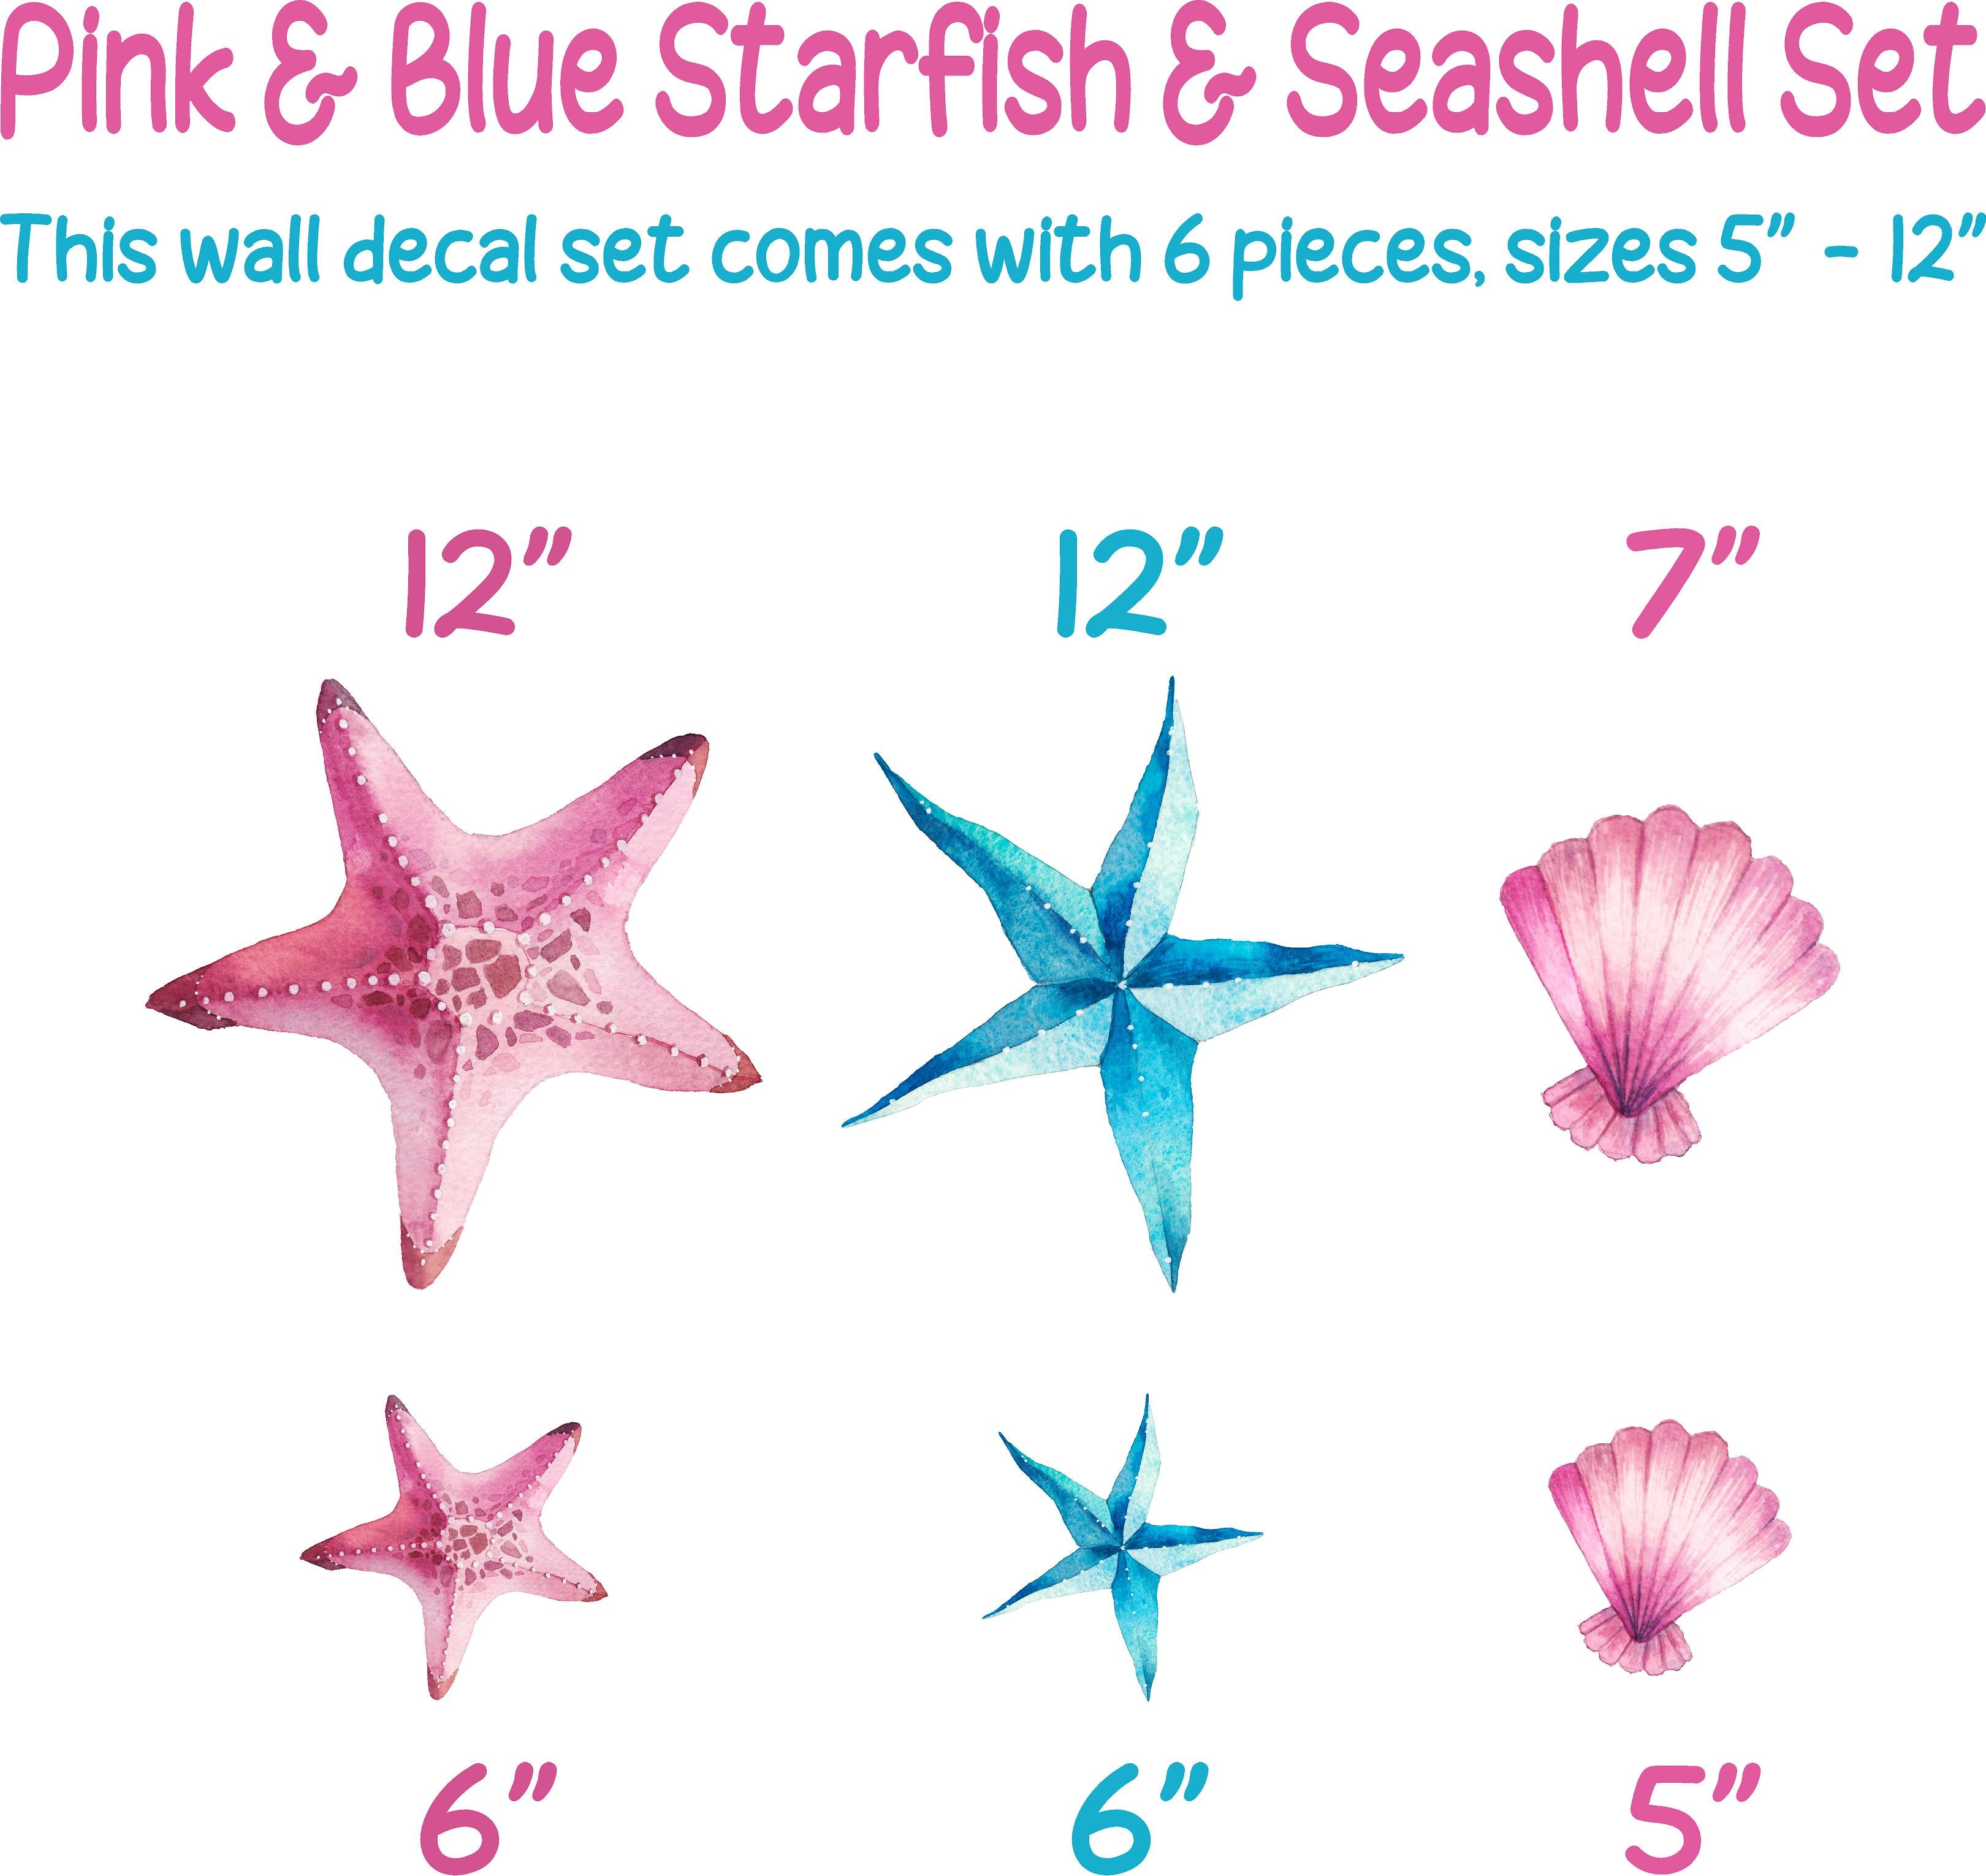 Watercolor Pink/Blue Starfish & Seashell Set Wall Decal Set of 6 Ocean Wall Sticker | DecalBaby